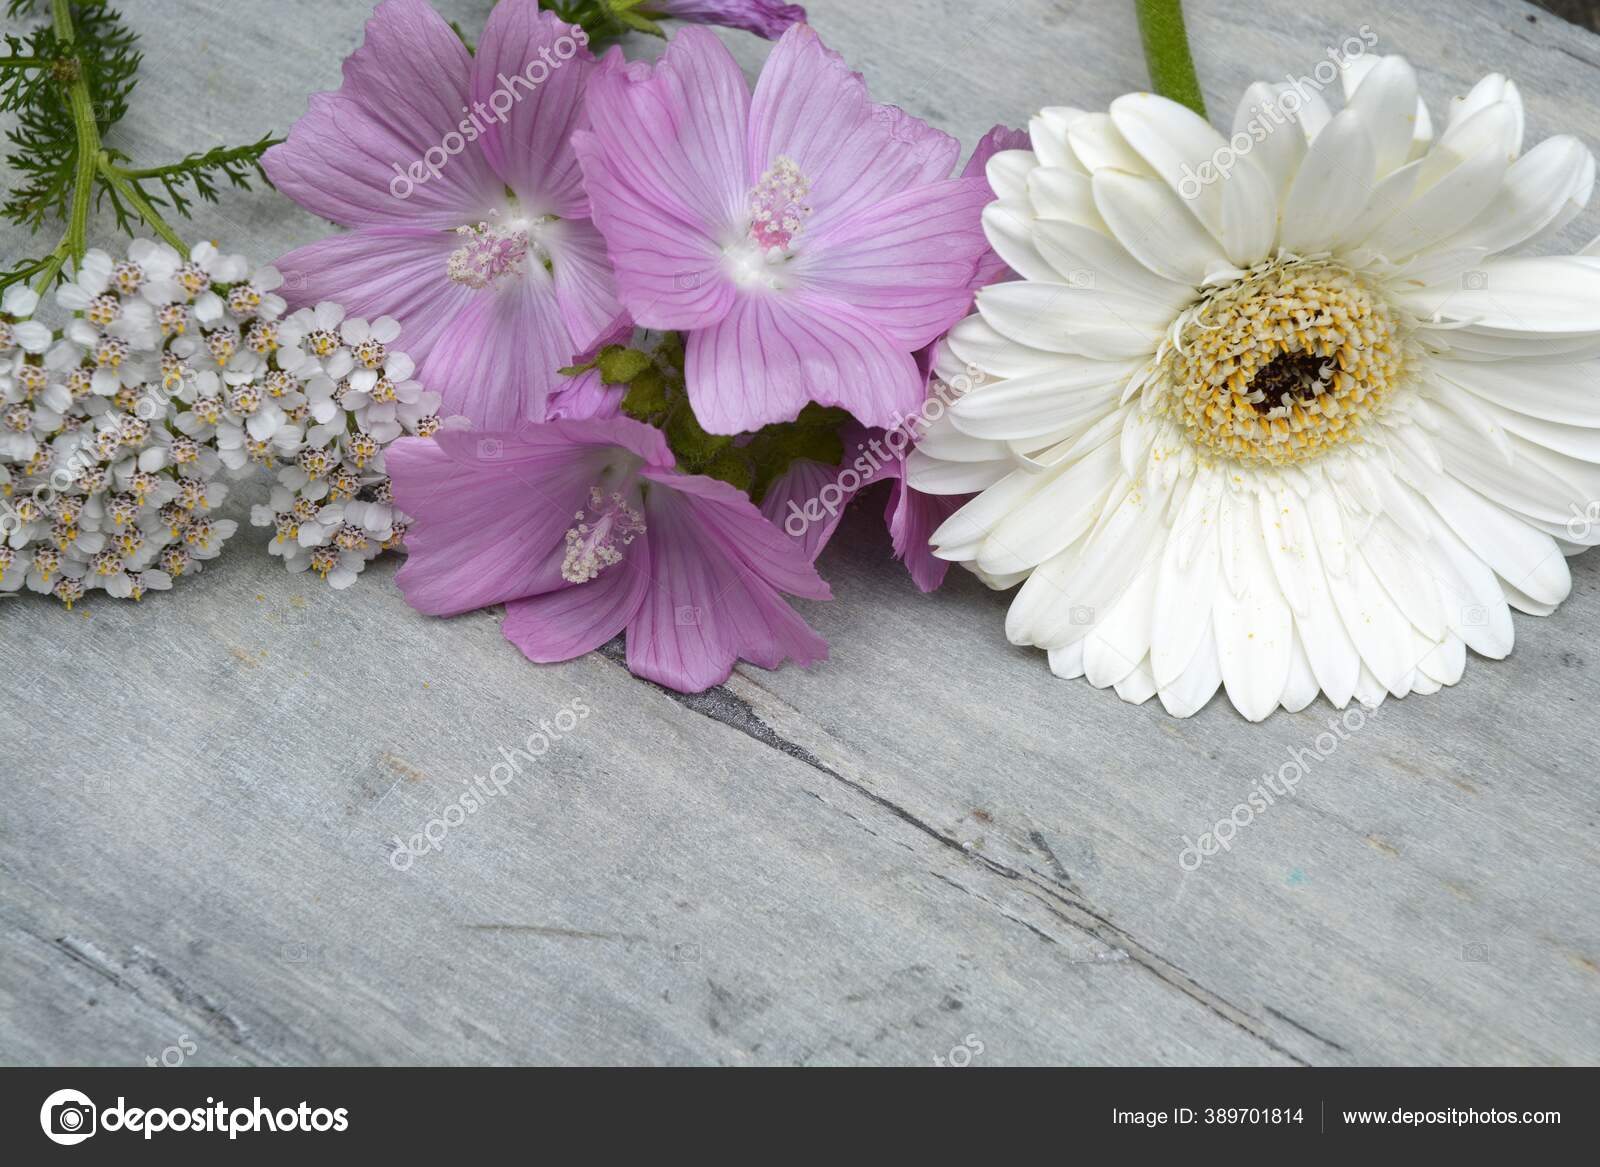 Close Up of Colorful Artificial Daisy Flowers Stock Image - Image